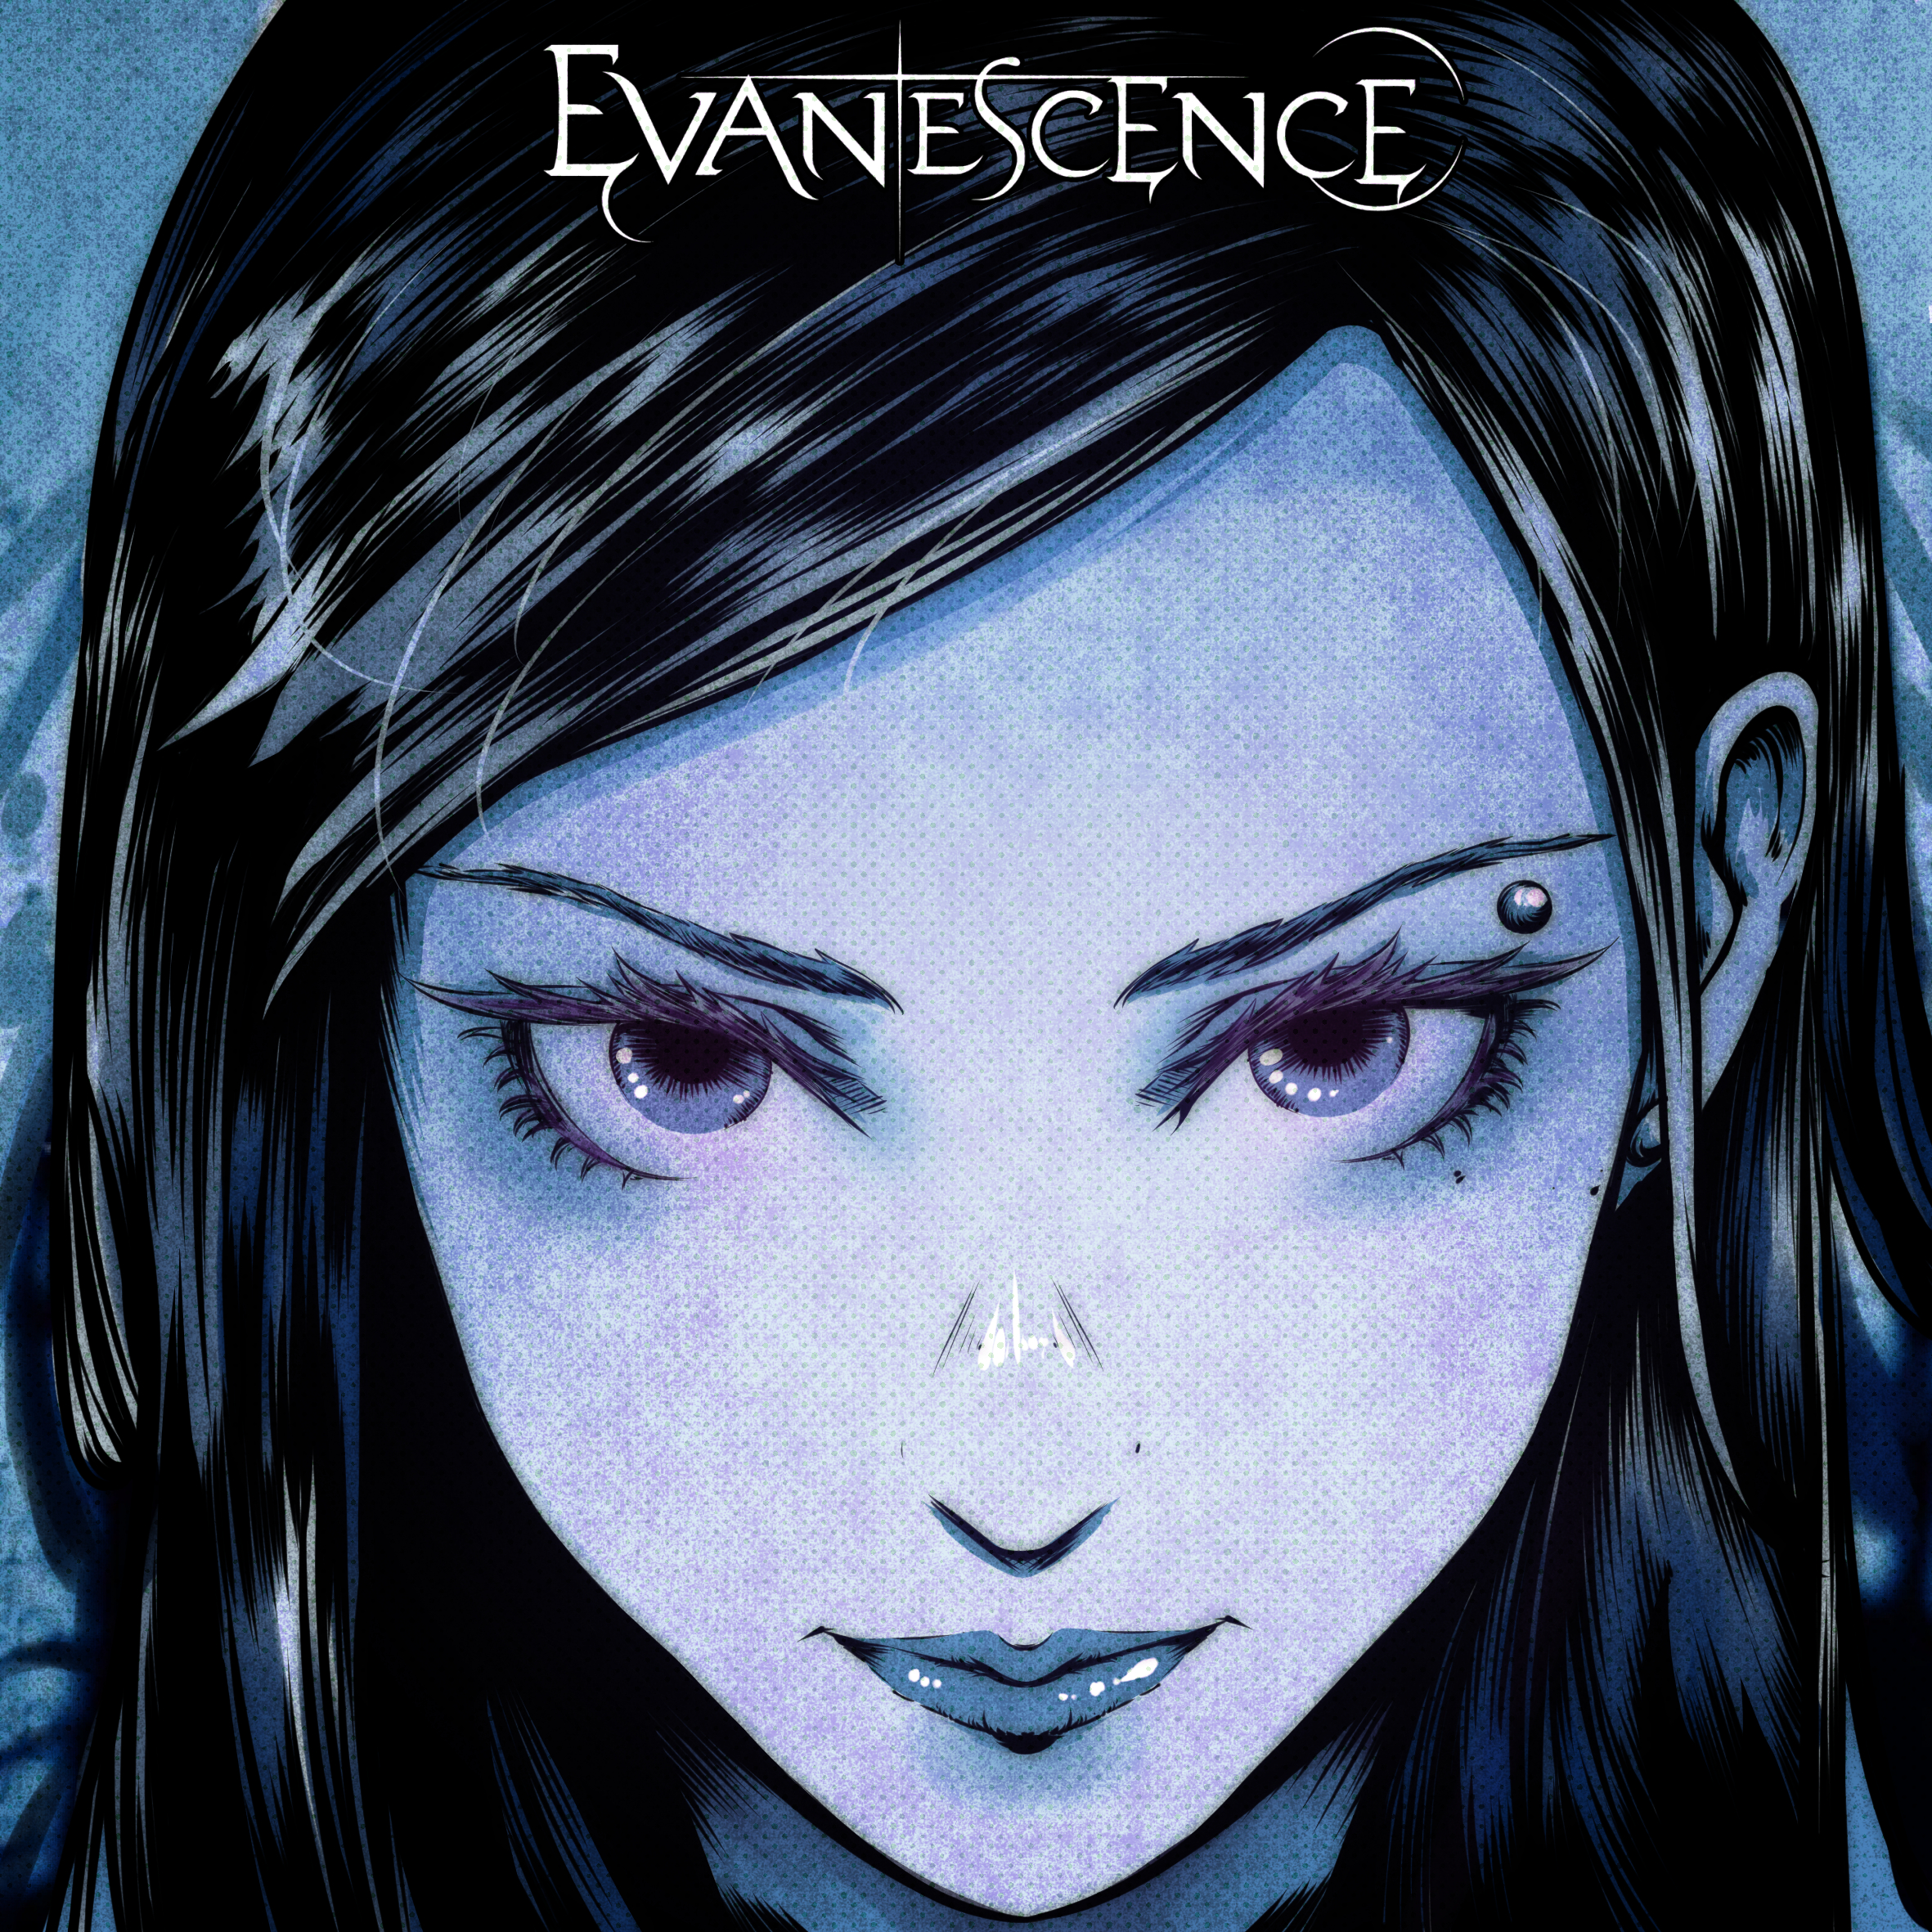 Evanescence re-draw by Ghostroke on DeviantArt